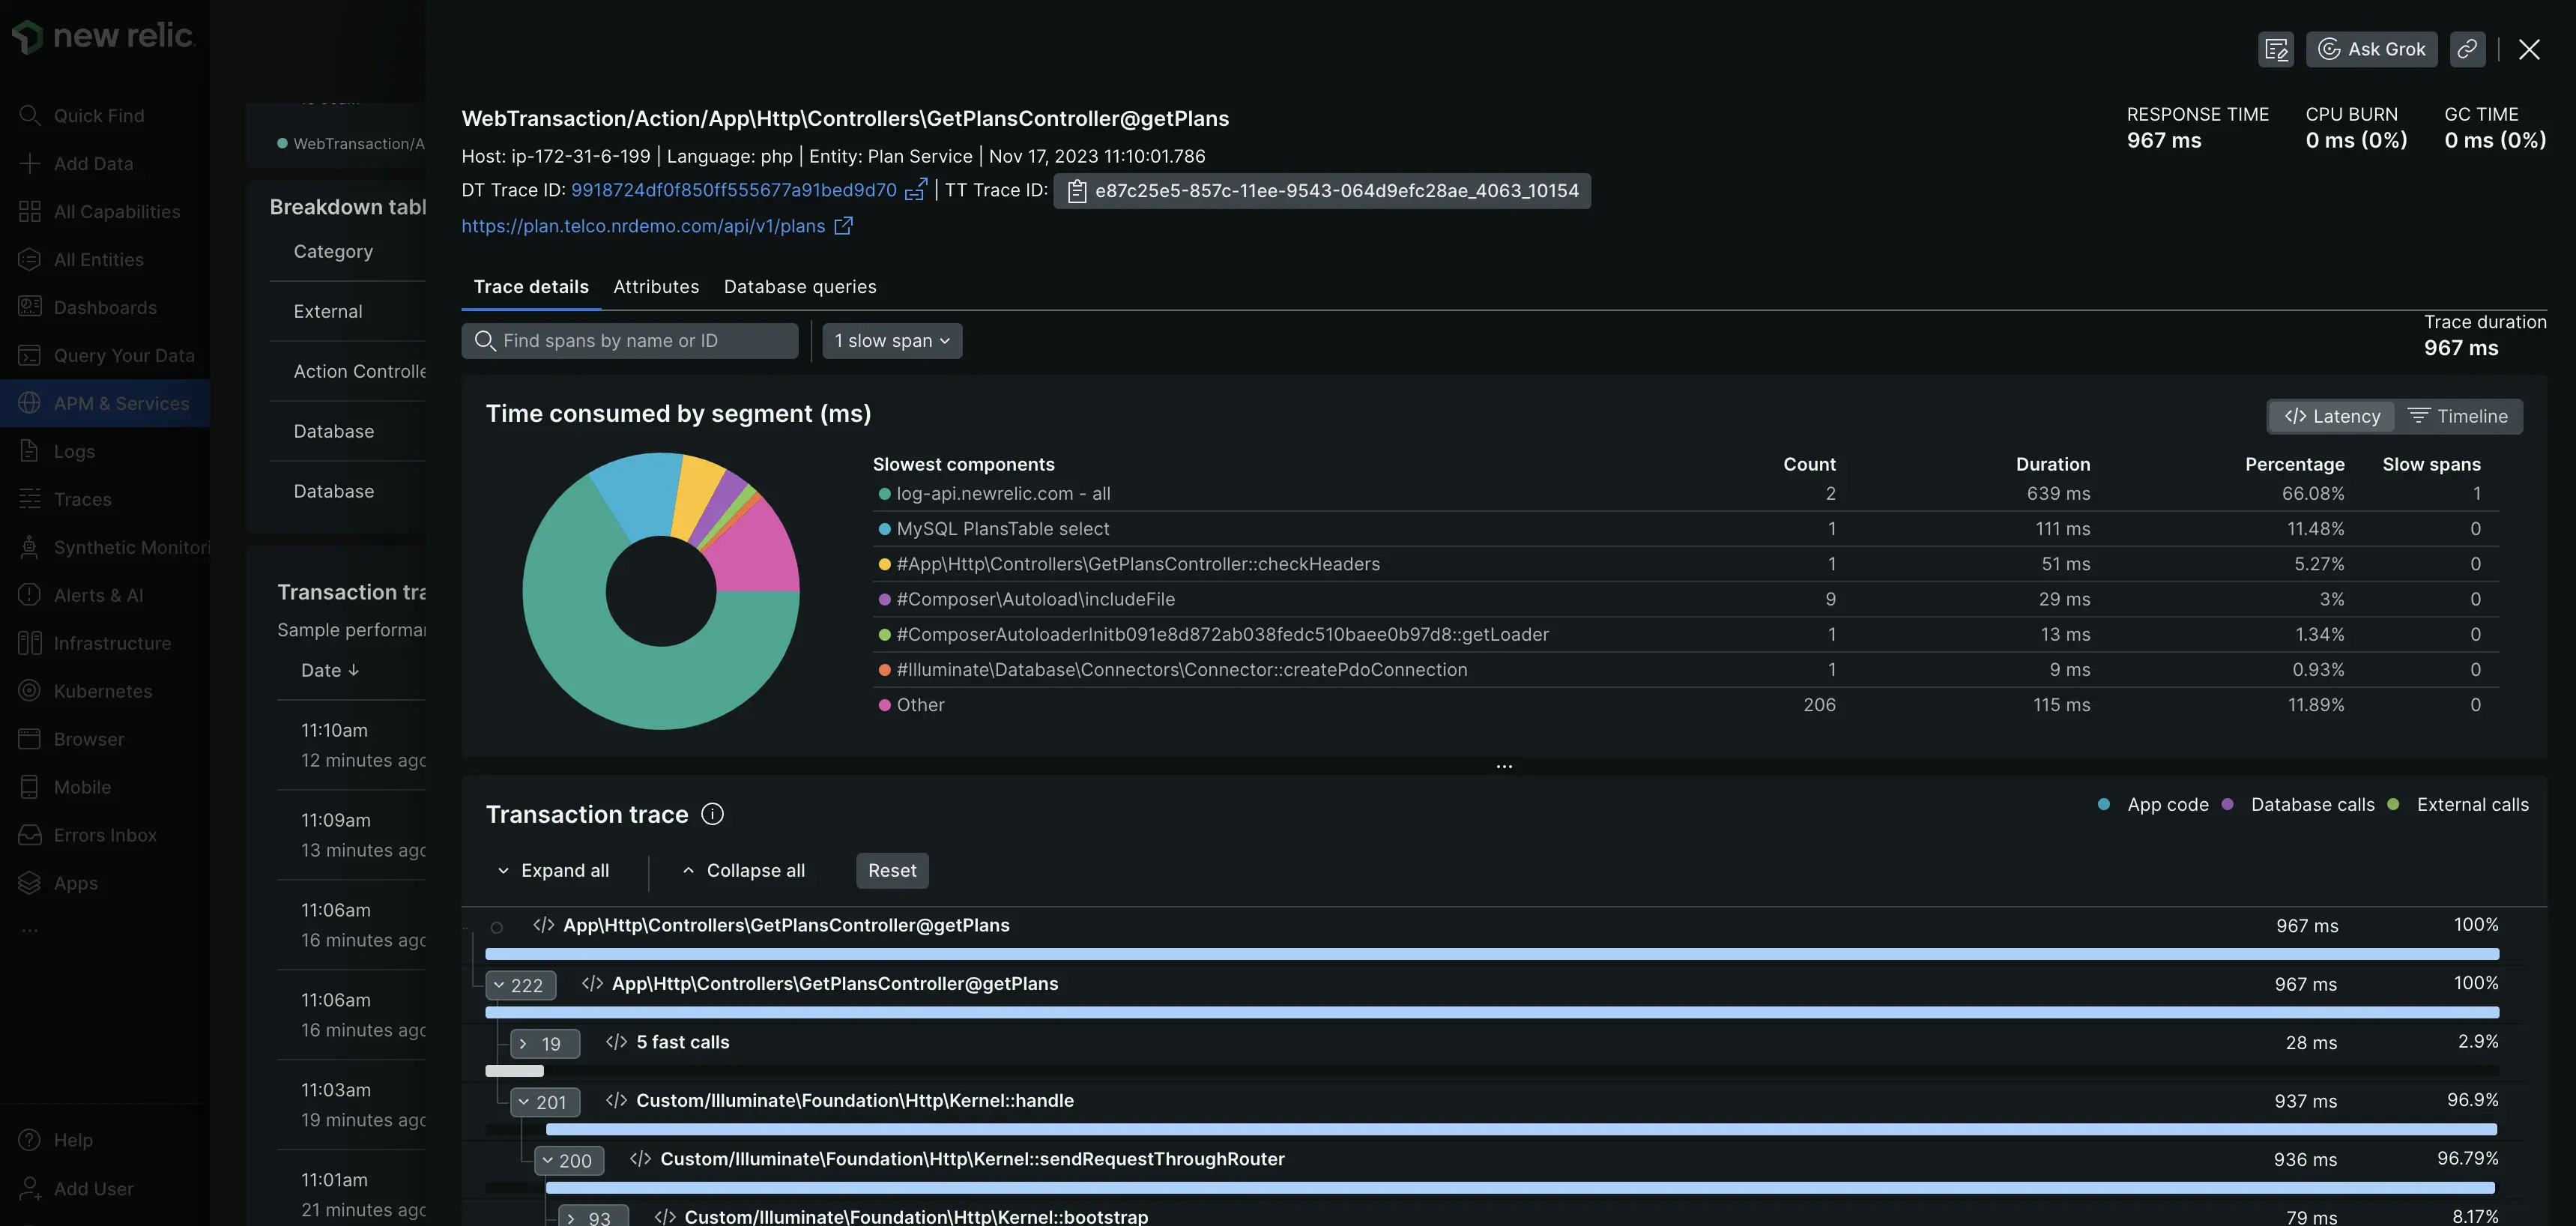 A screenshot depiciting the transaction trace details view.